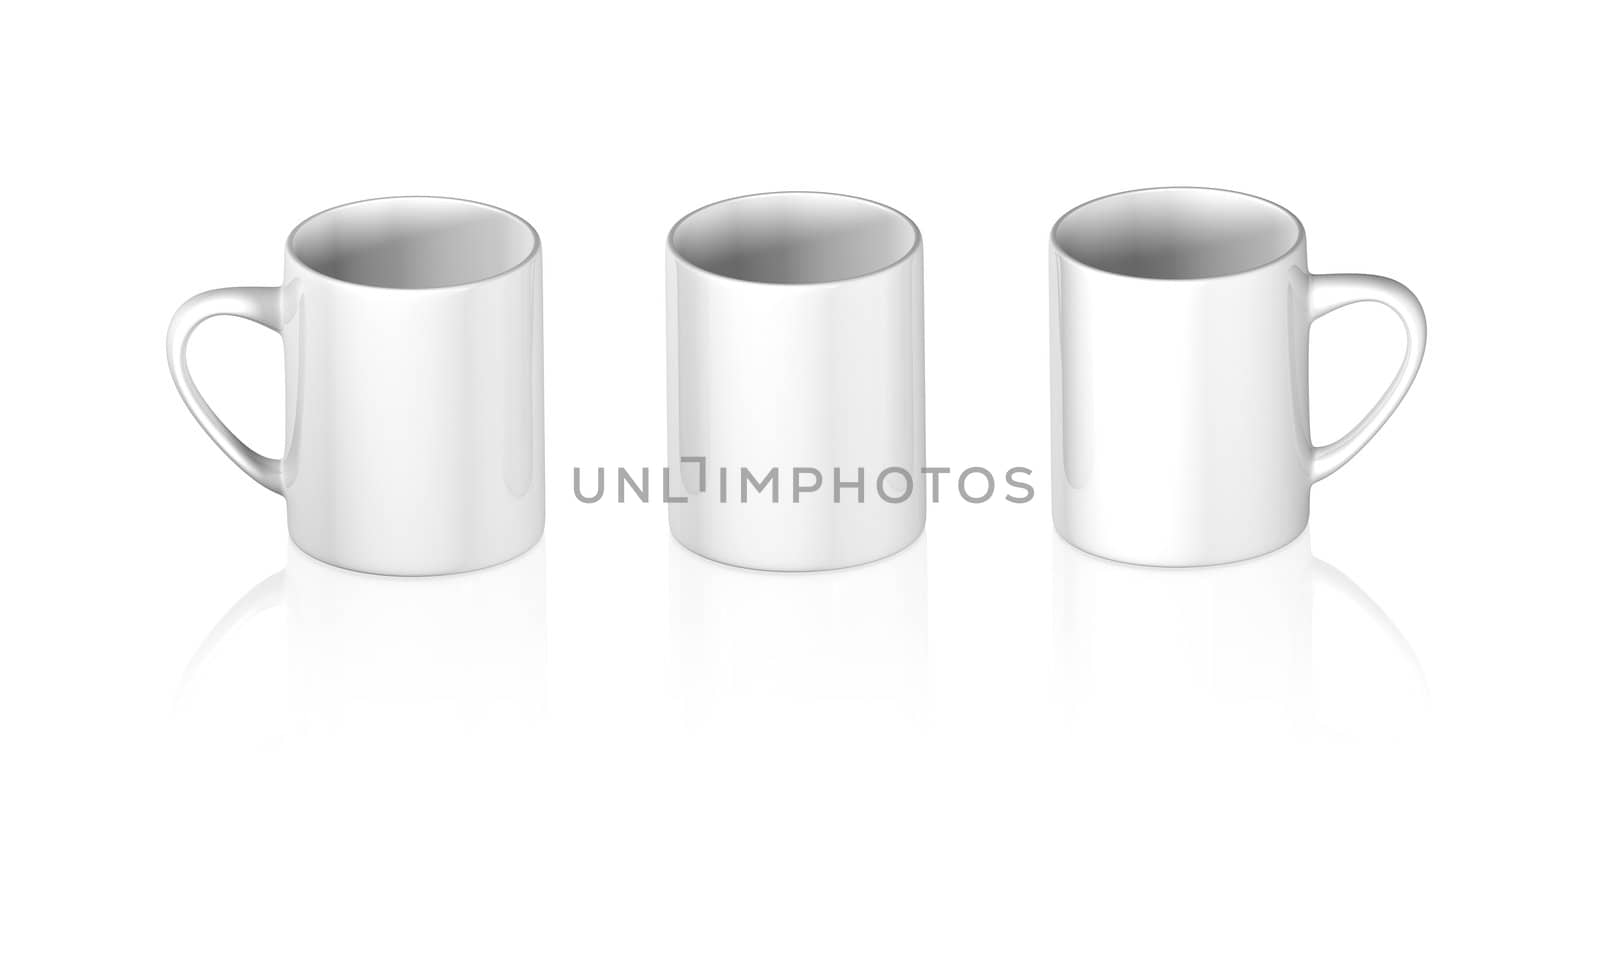 An image of three classic white cups